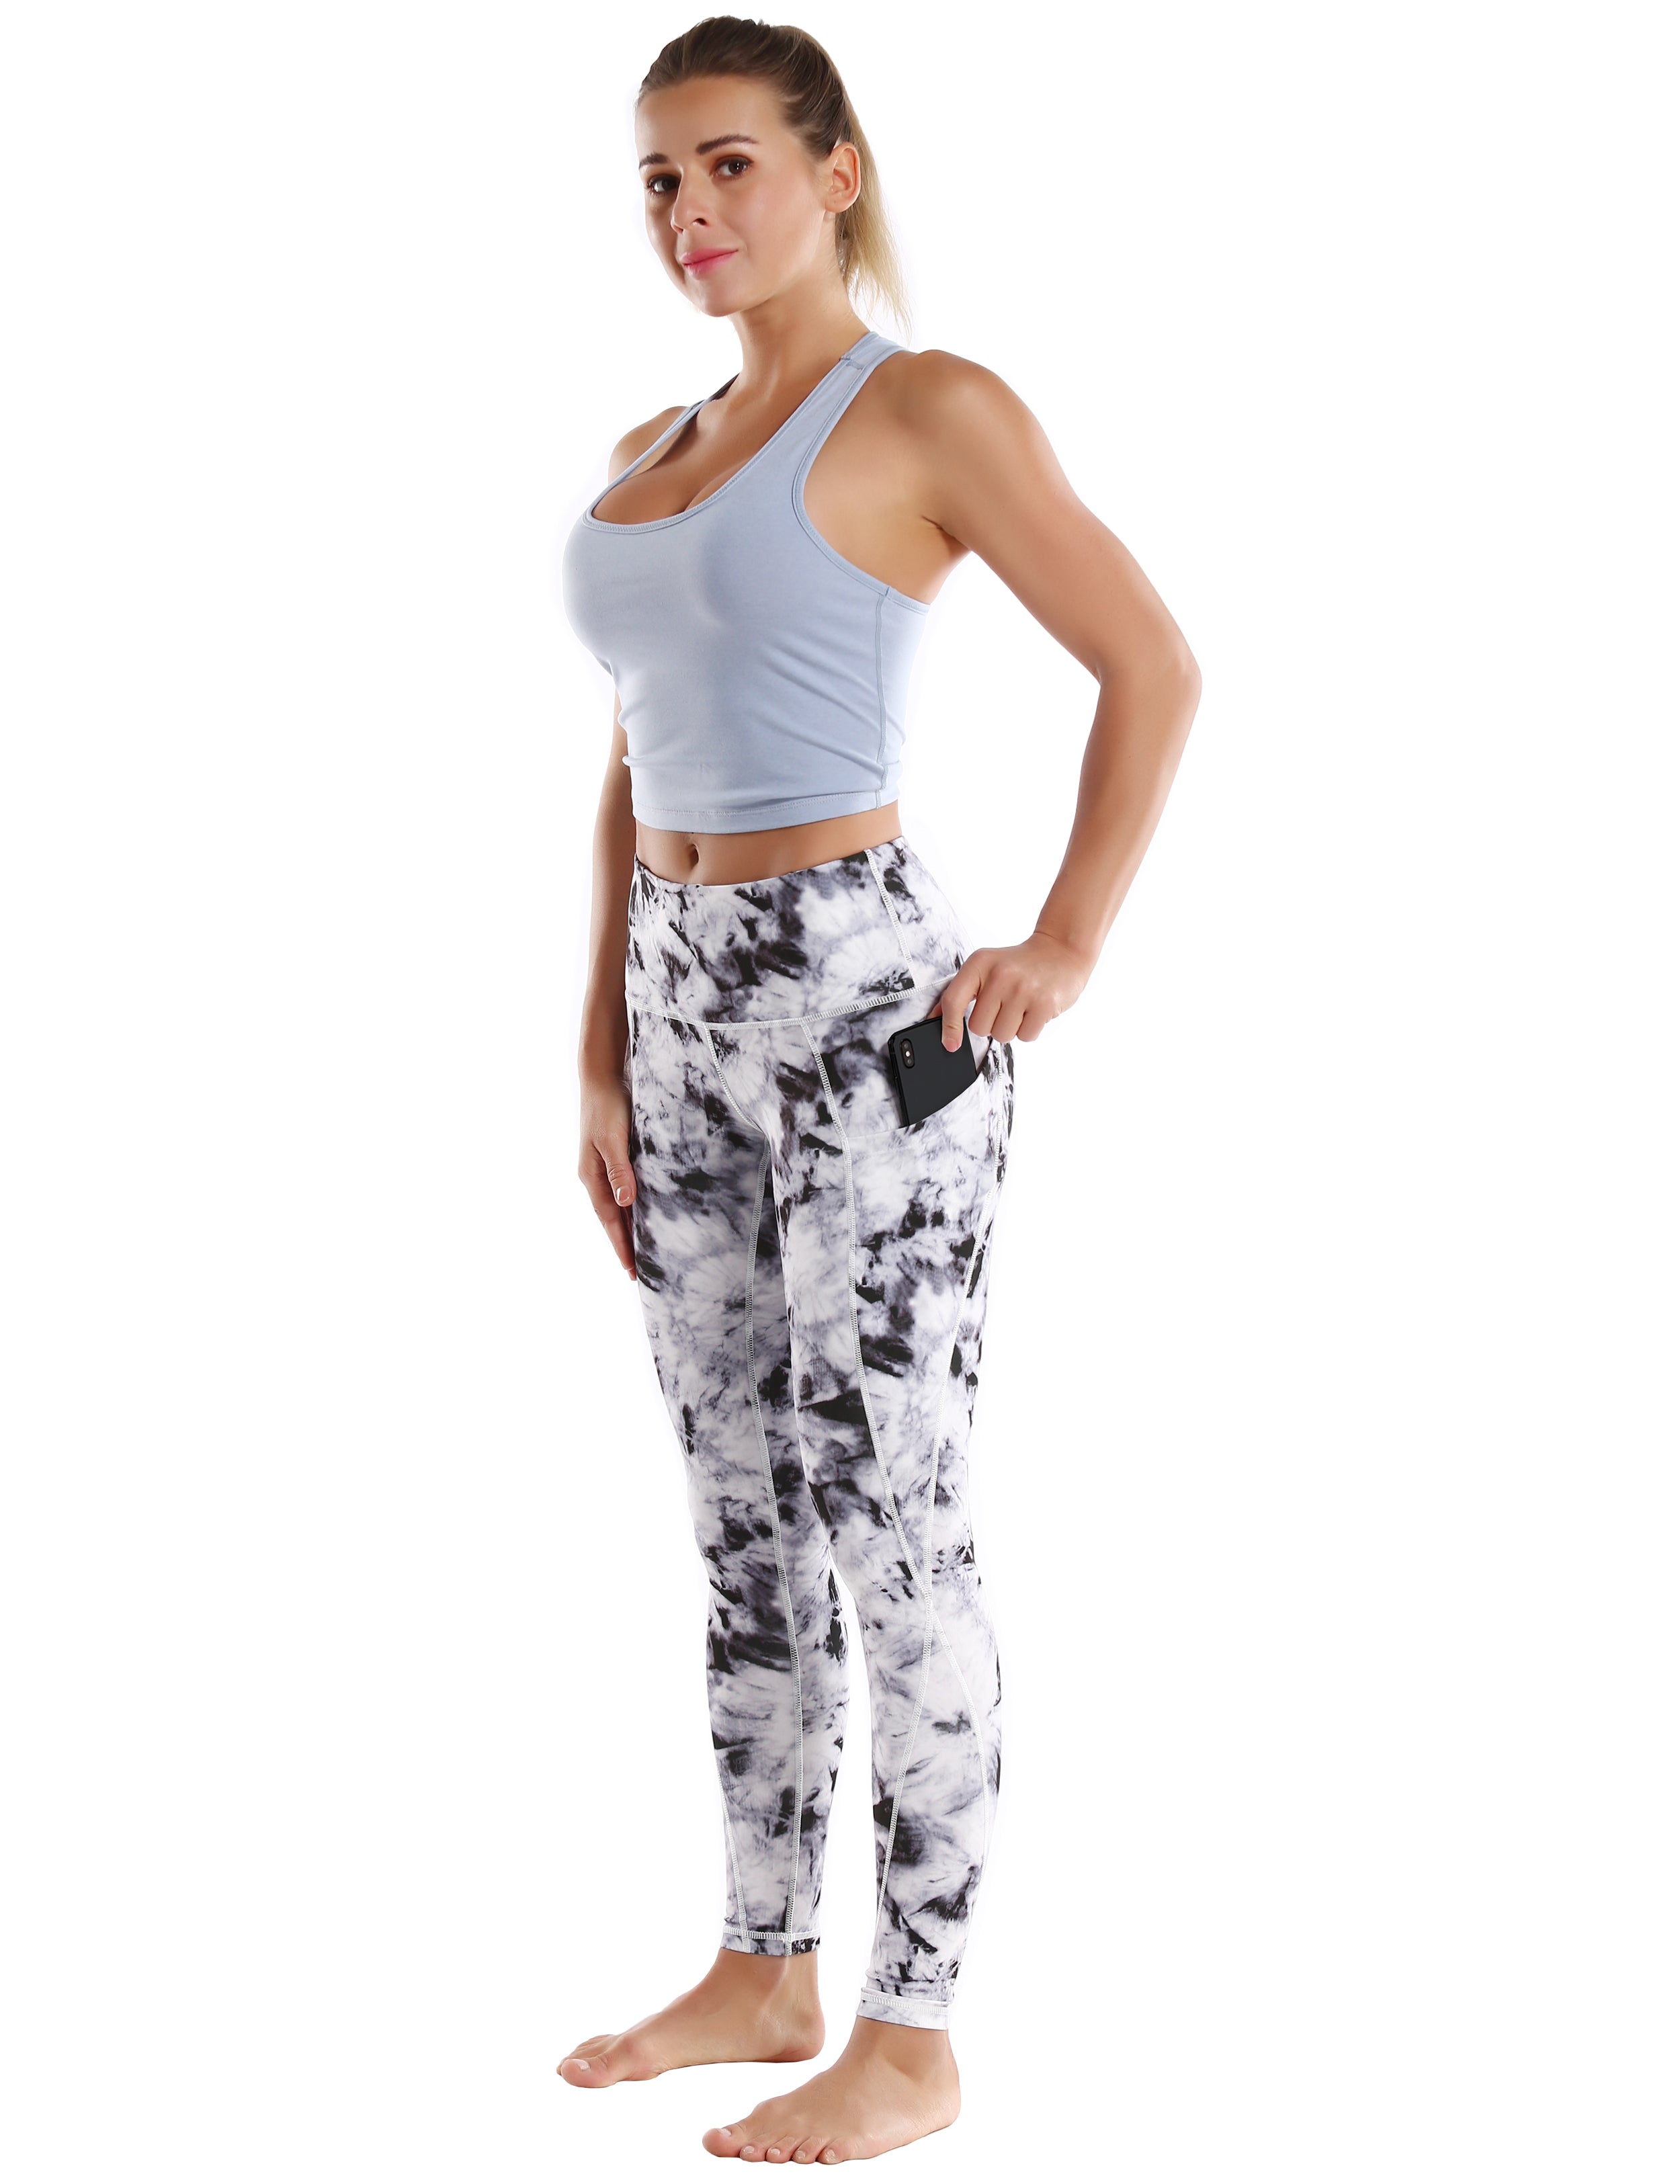 High Waist Side Pockets Biking Pants blackdandelion 78%Polyester/22%Spandex Fabric doesn't attract lint easily 4-way stretch No see-through Moisture-wicking Tummy control Inner pocket